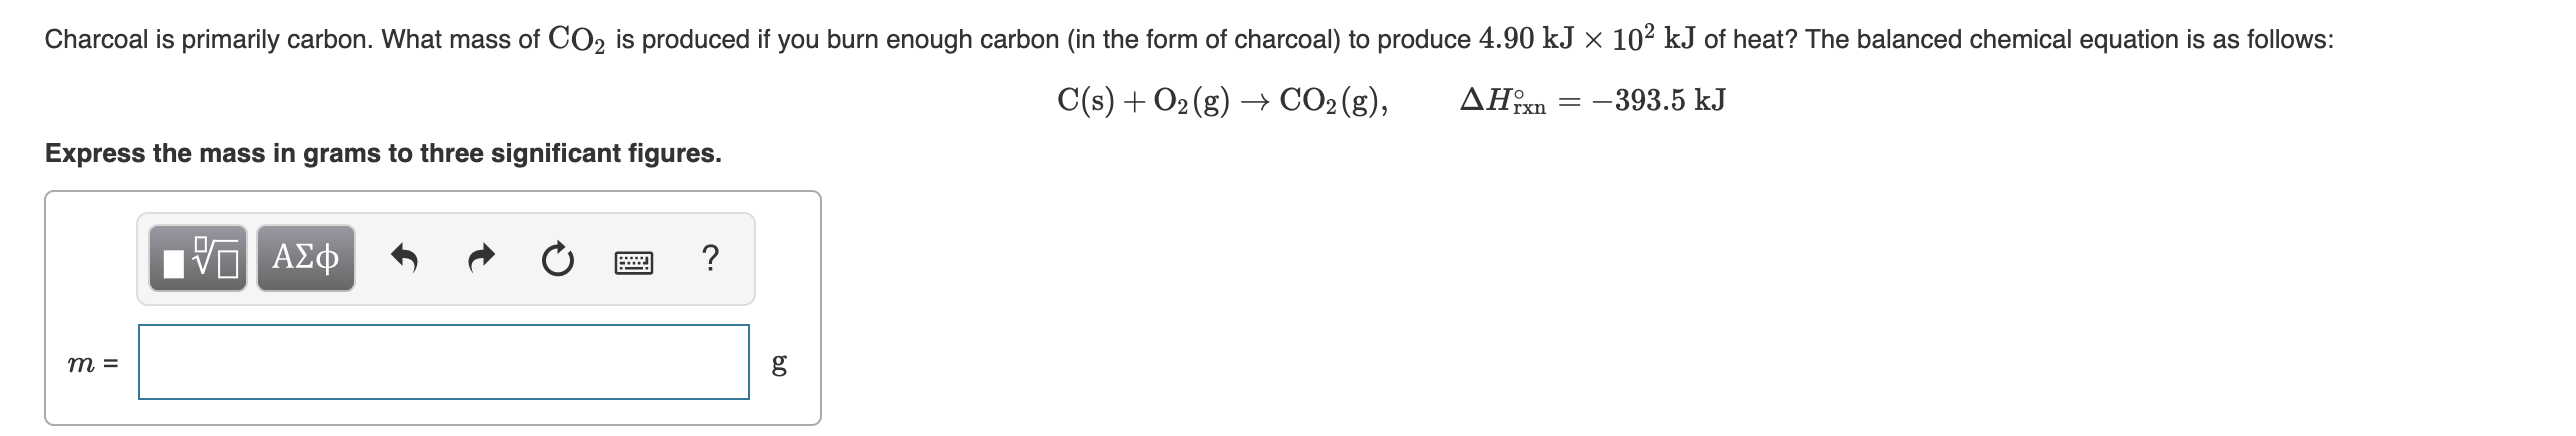 Charcoal is primarily carbon. What mass of CO2 is produced if you burn enough carbon (in the form of charcoal) to produce 4.90 kJ × 10² kJ of heat? The balanced chemical equation is as follows:
C(s) + O2 (g) → CO2 (g),
ΔΗ
-393.5 kJ
Express the mass in grams to three significant figures.
ο ΑΣφ
т 3
